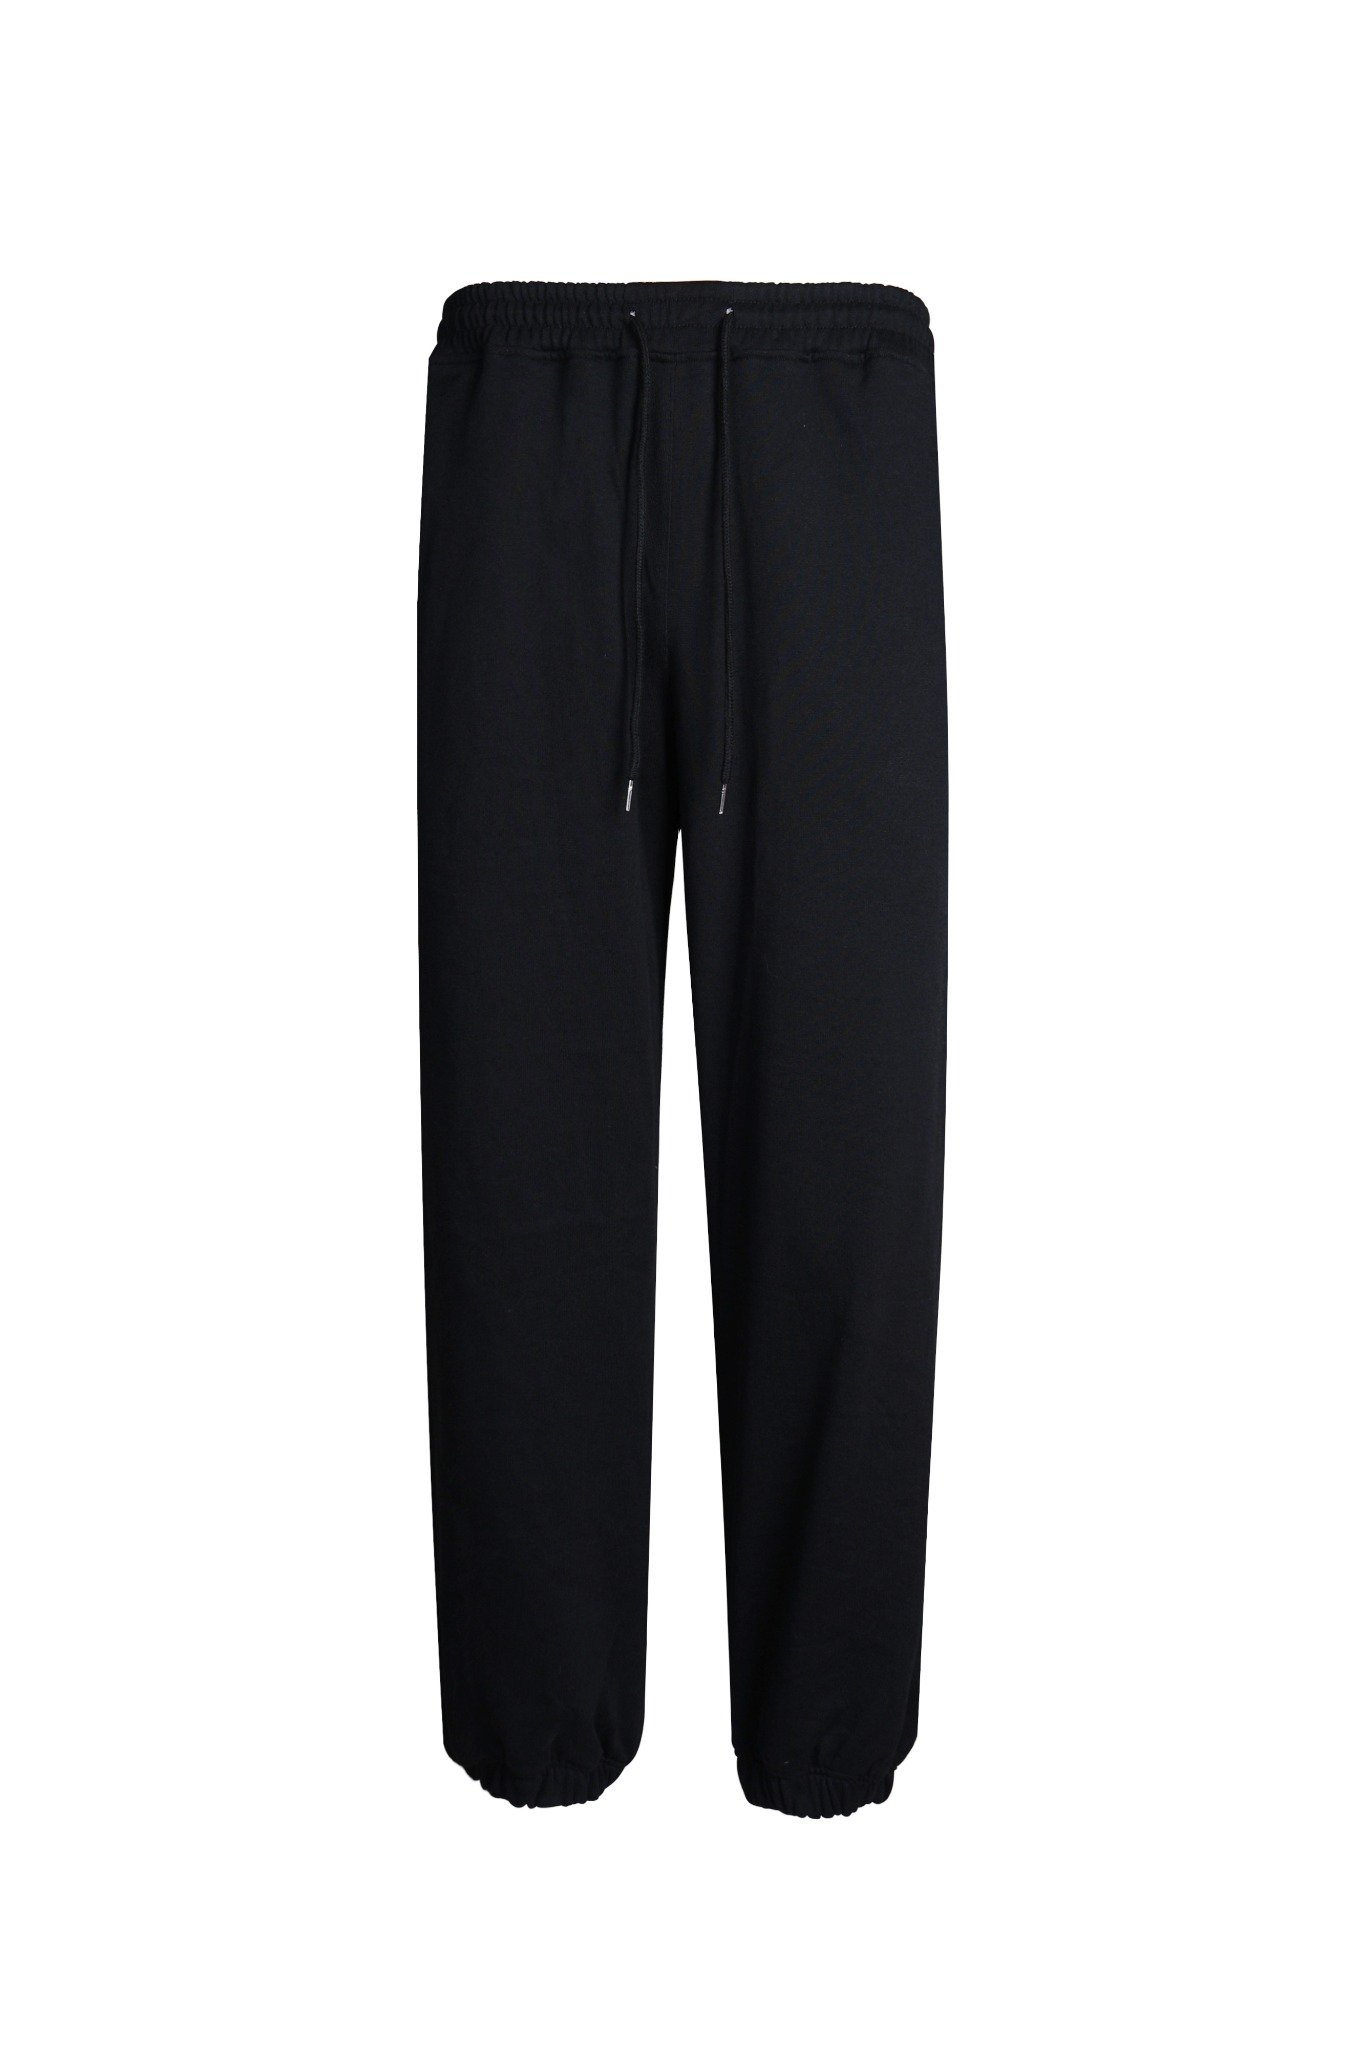  BLACK RELAXED FIT SWEATPANTS 